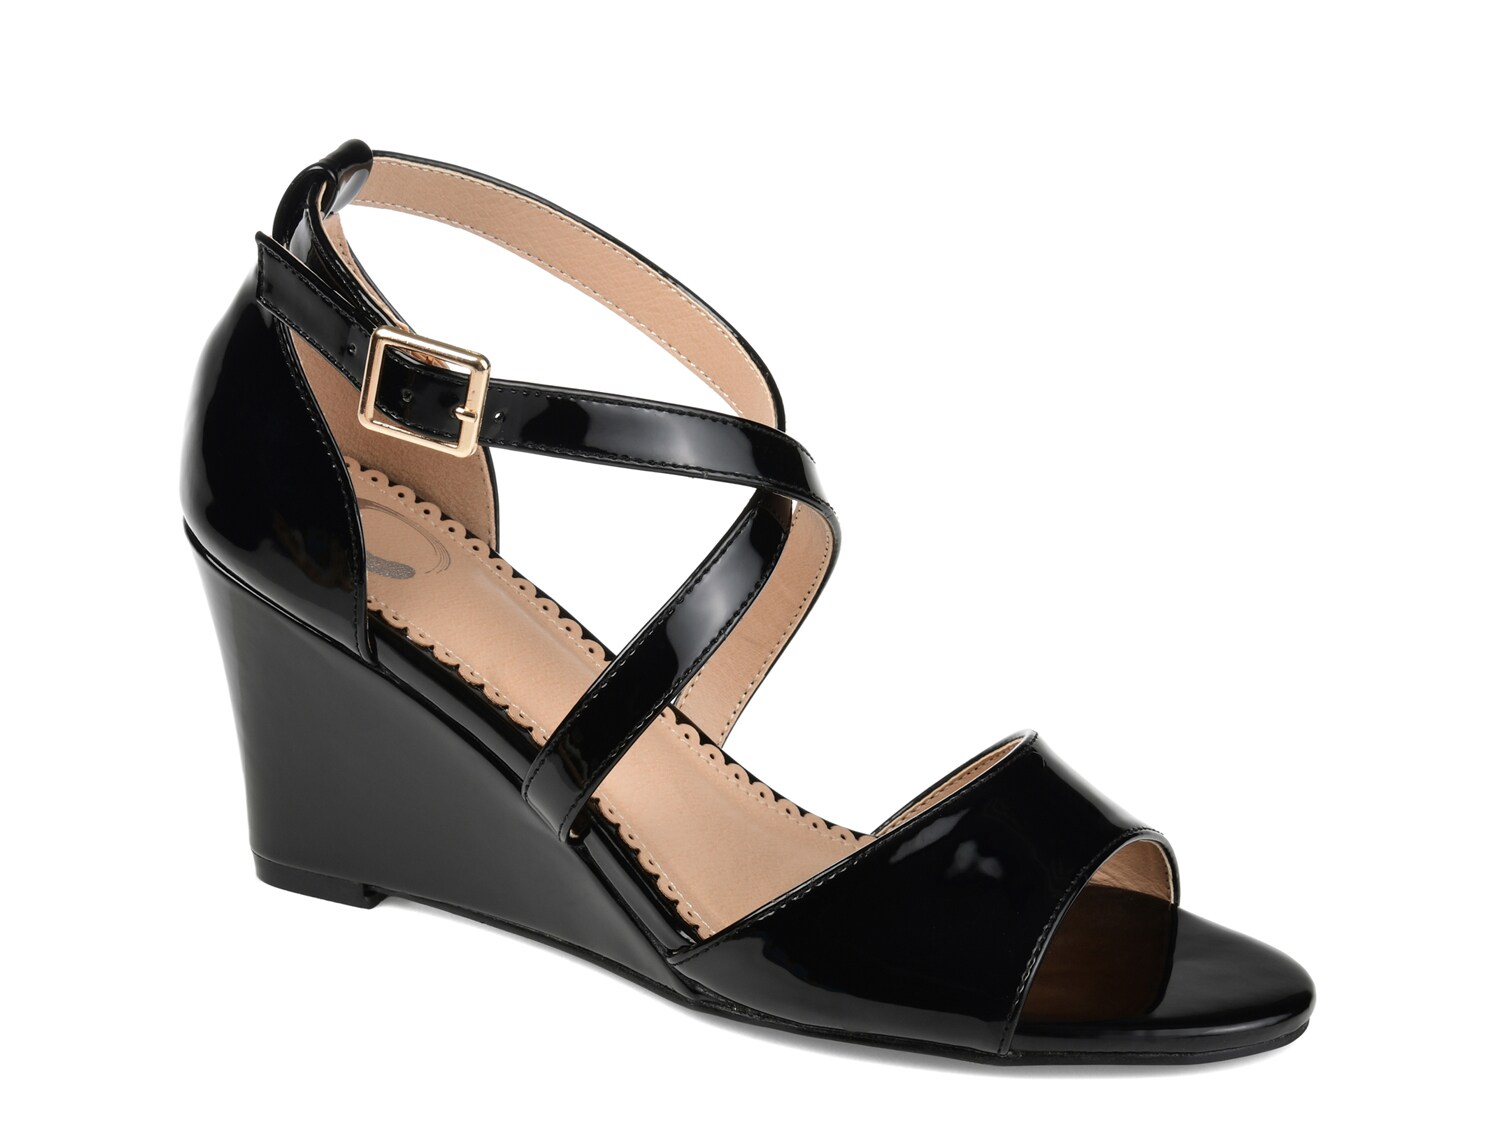 Journee Collection Stacey Wedge Sandal - Free Shipping | DSW